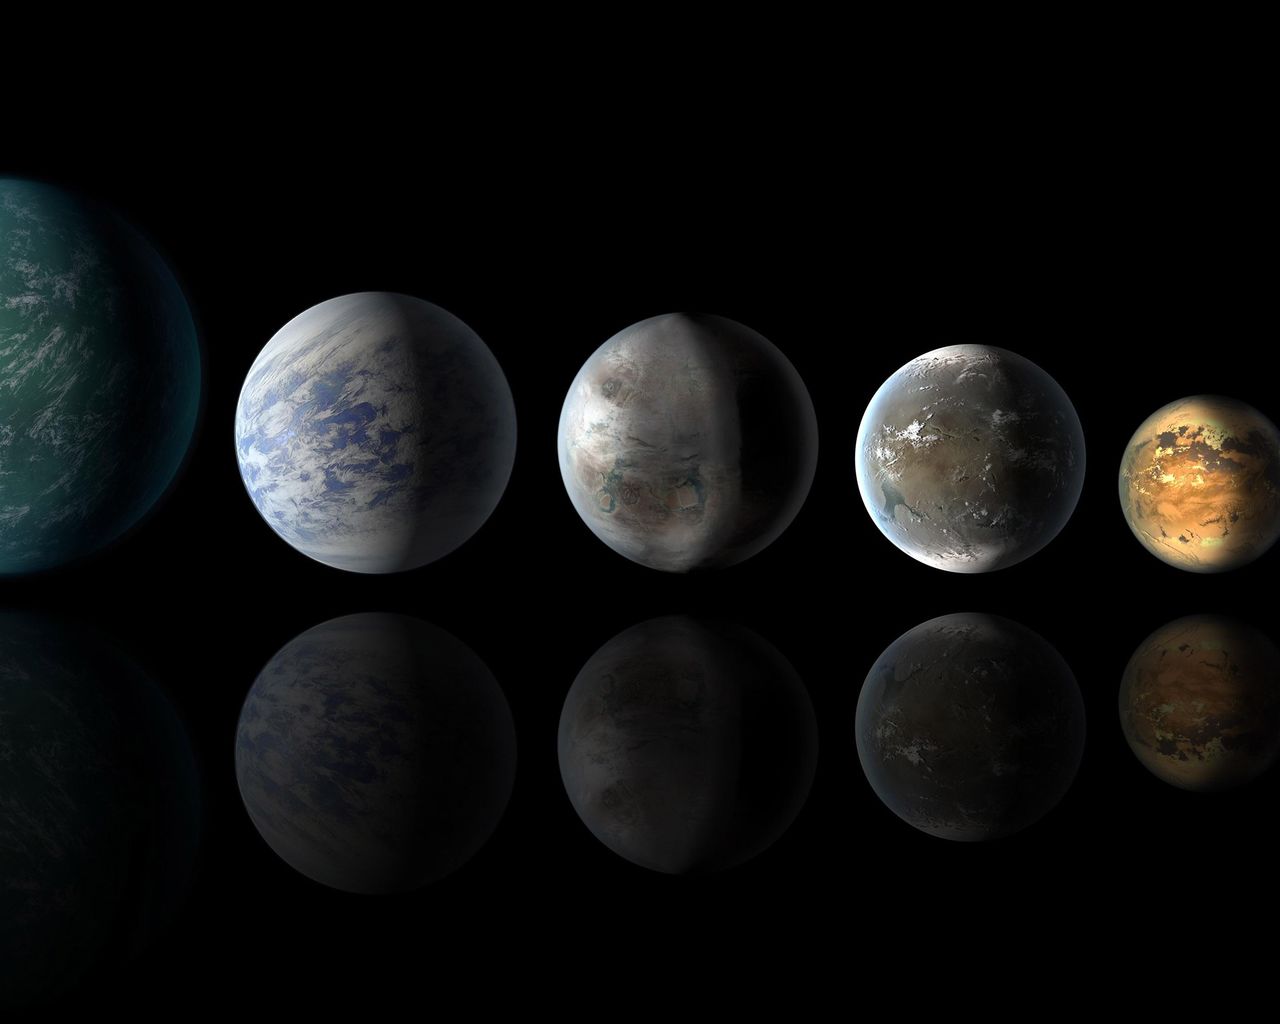 Space Images | Pantheon of Planets Similar to Earth (Artist's Concept)